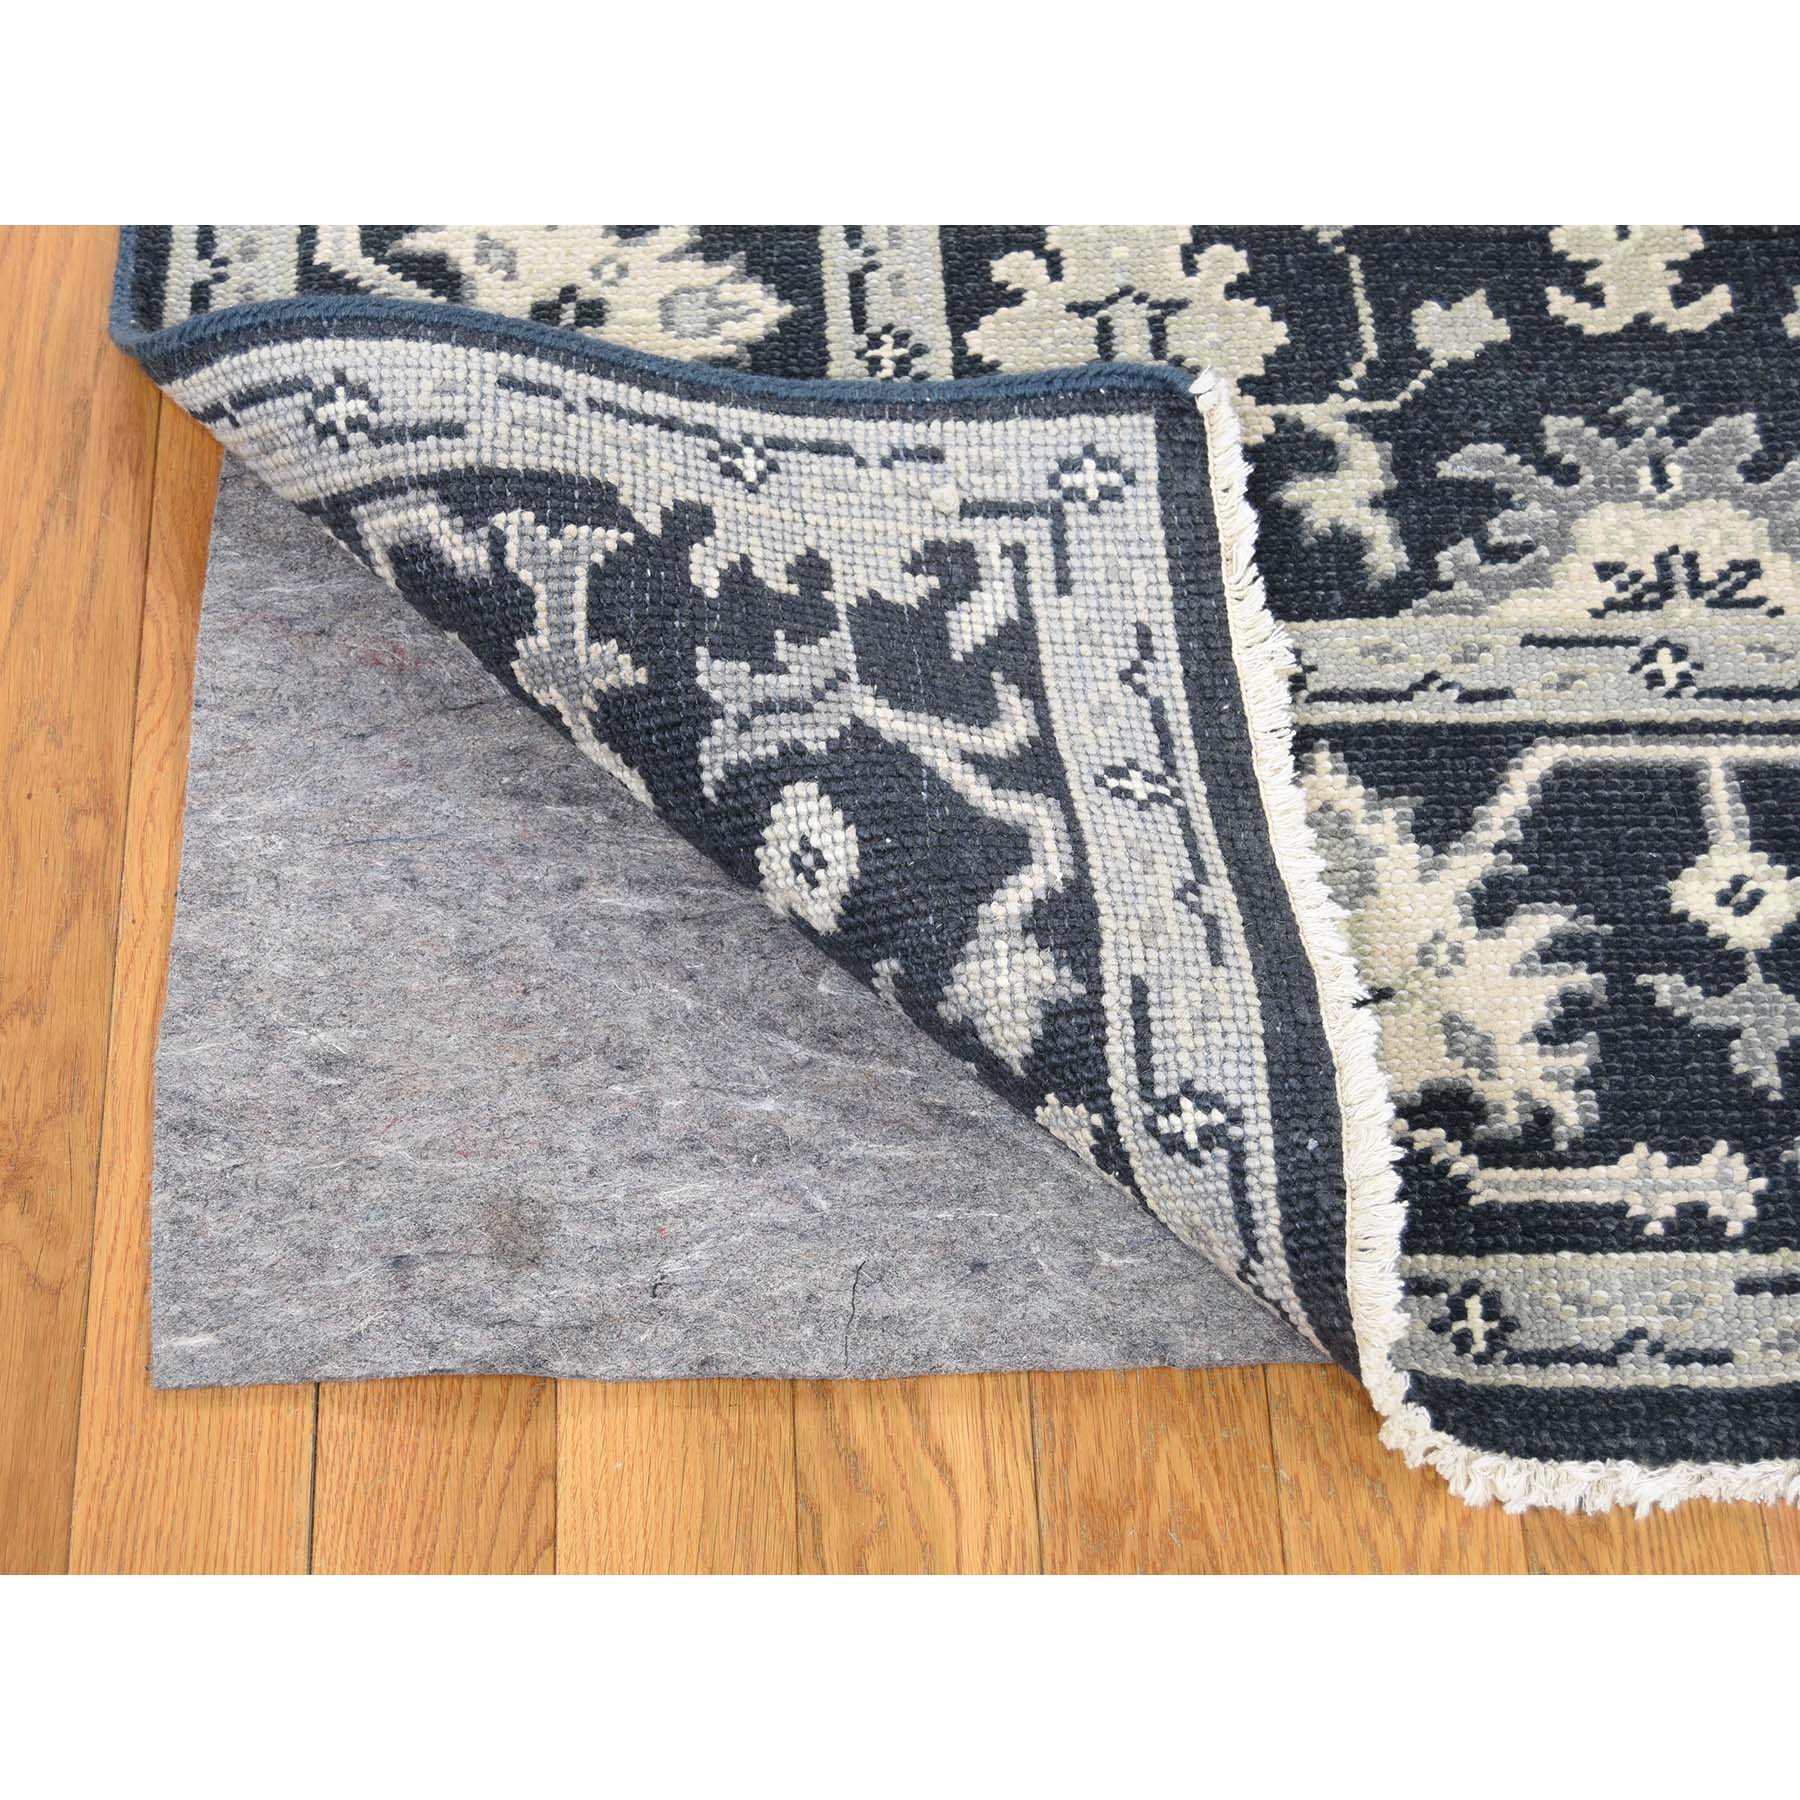 6'1"x9' Oushak Turkish Knot Cropped Thin Midnight Blue Hand Woven Oriental Rug 